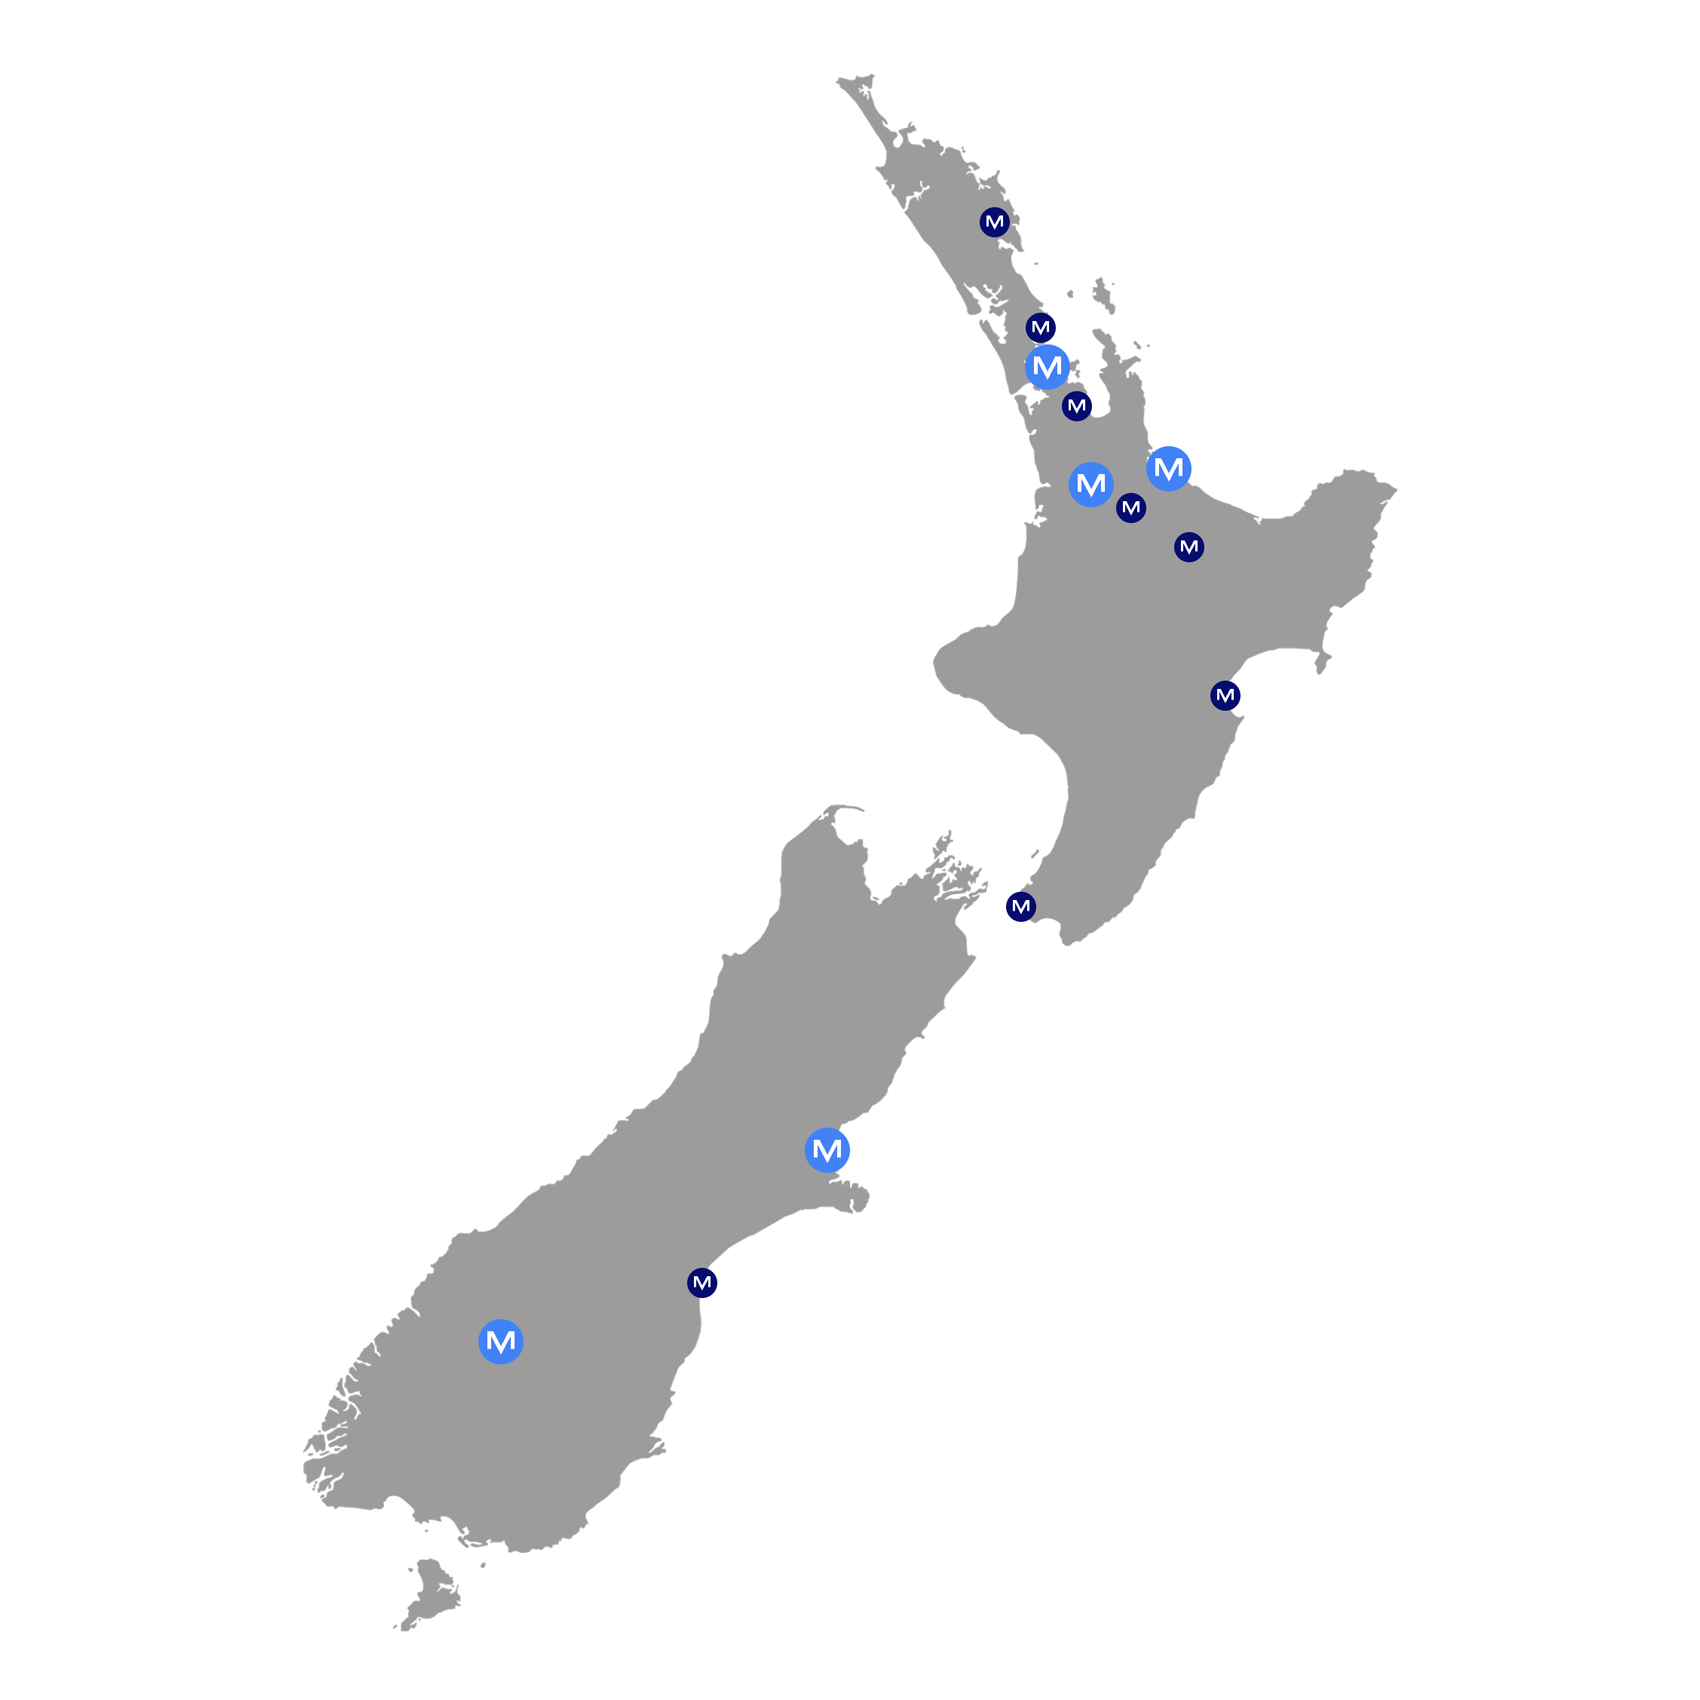 Illustrated map of New Zealand, with blue dots showing the locations of Maven offices